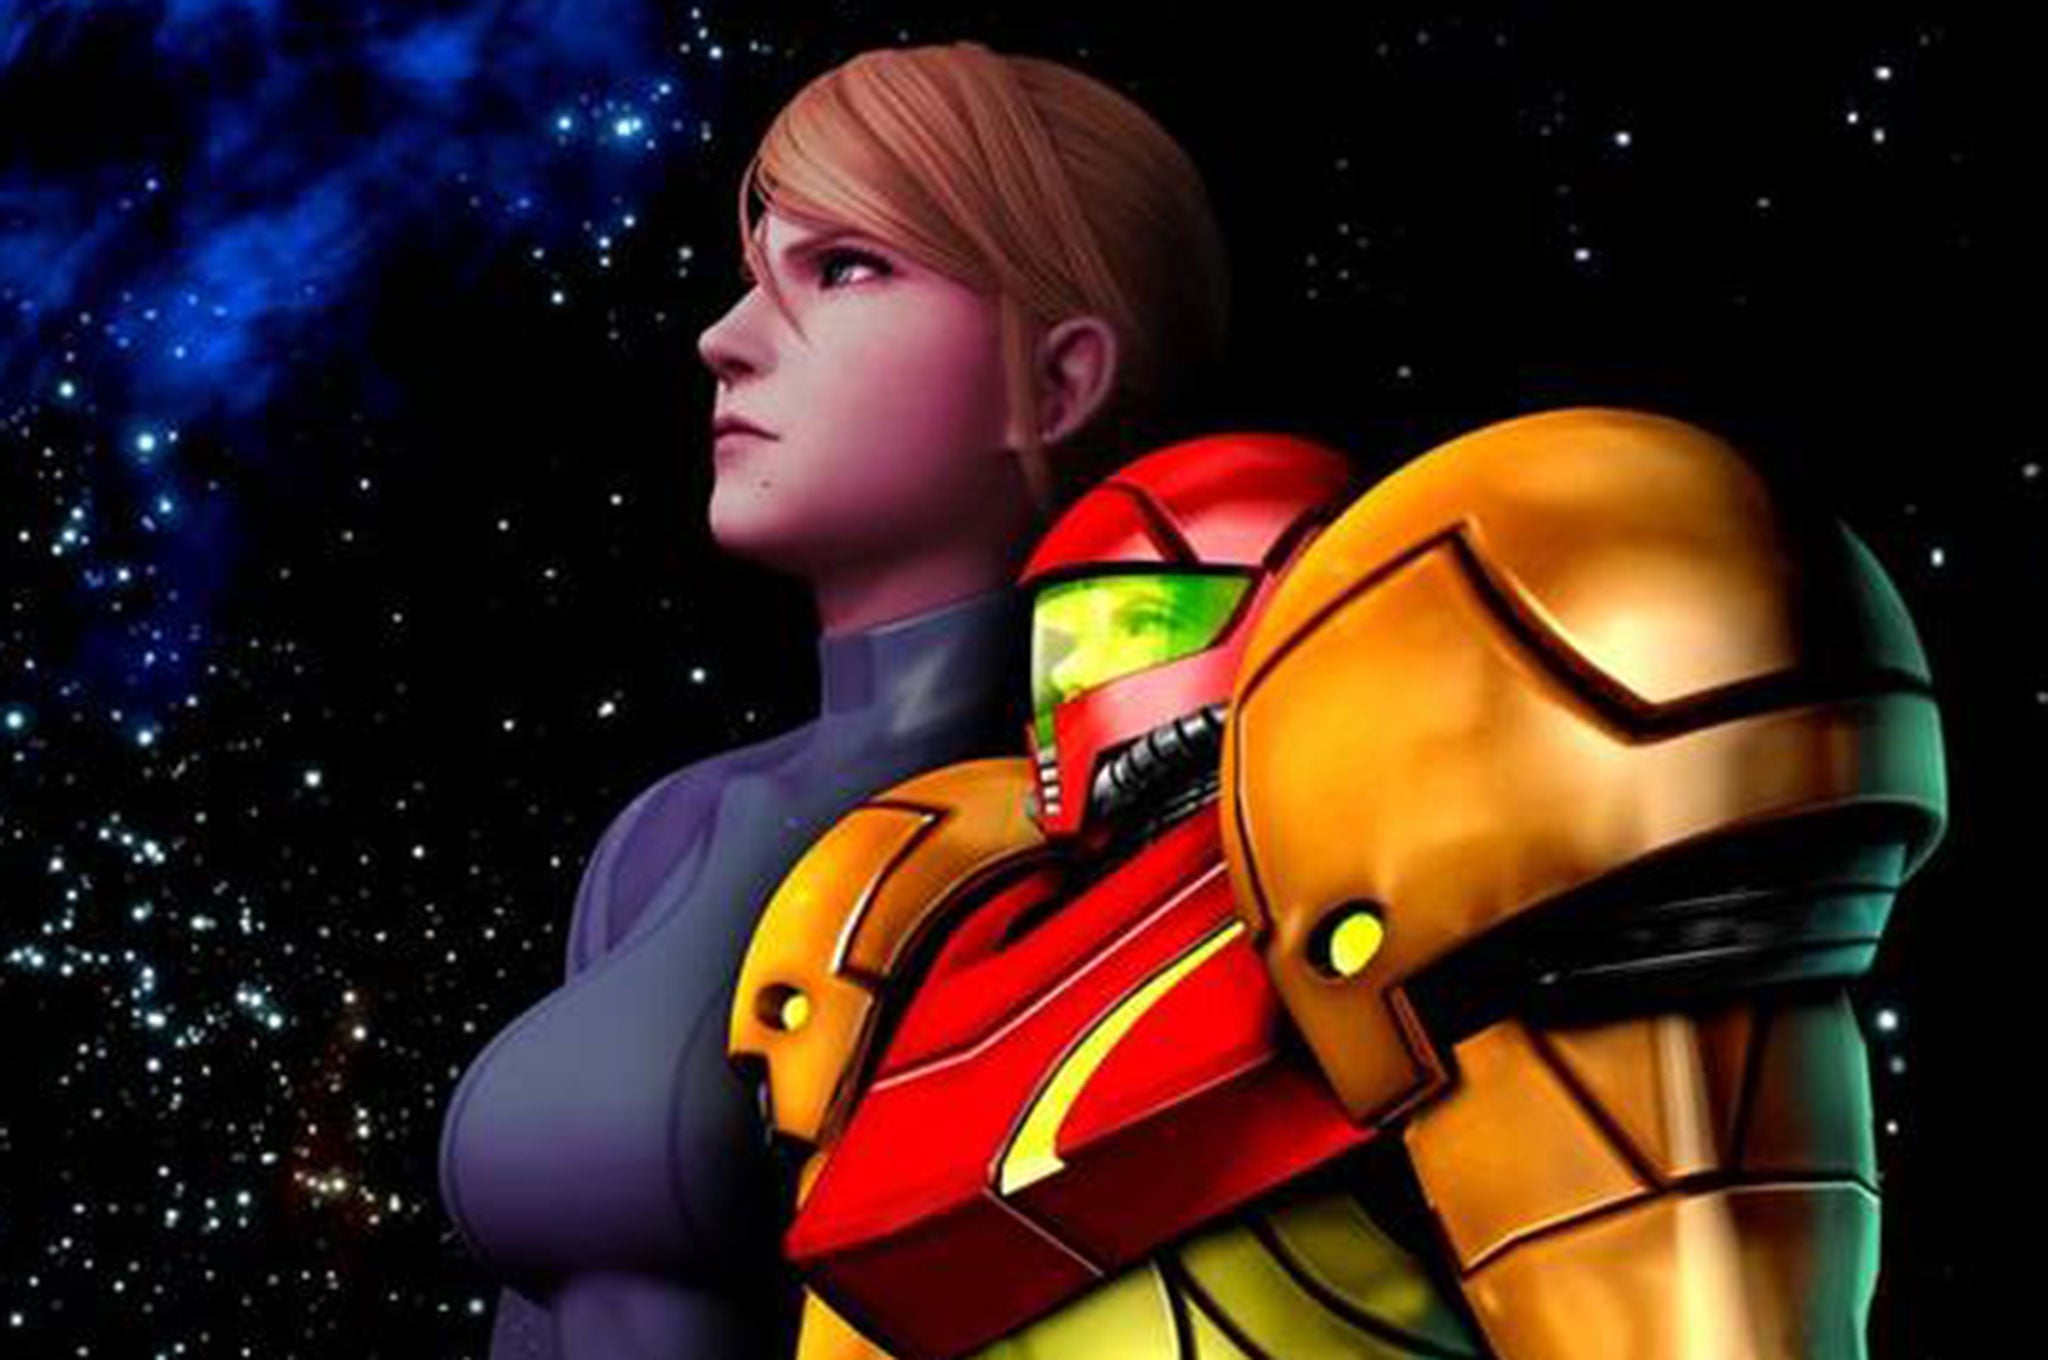 Samus Arun, one of gaming's most iconic women characters